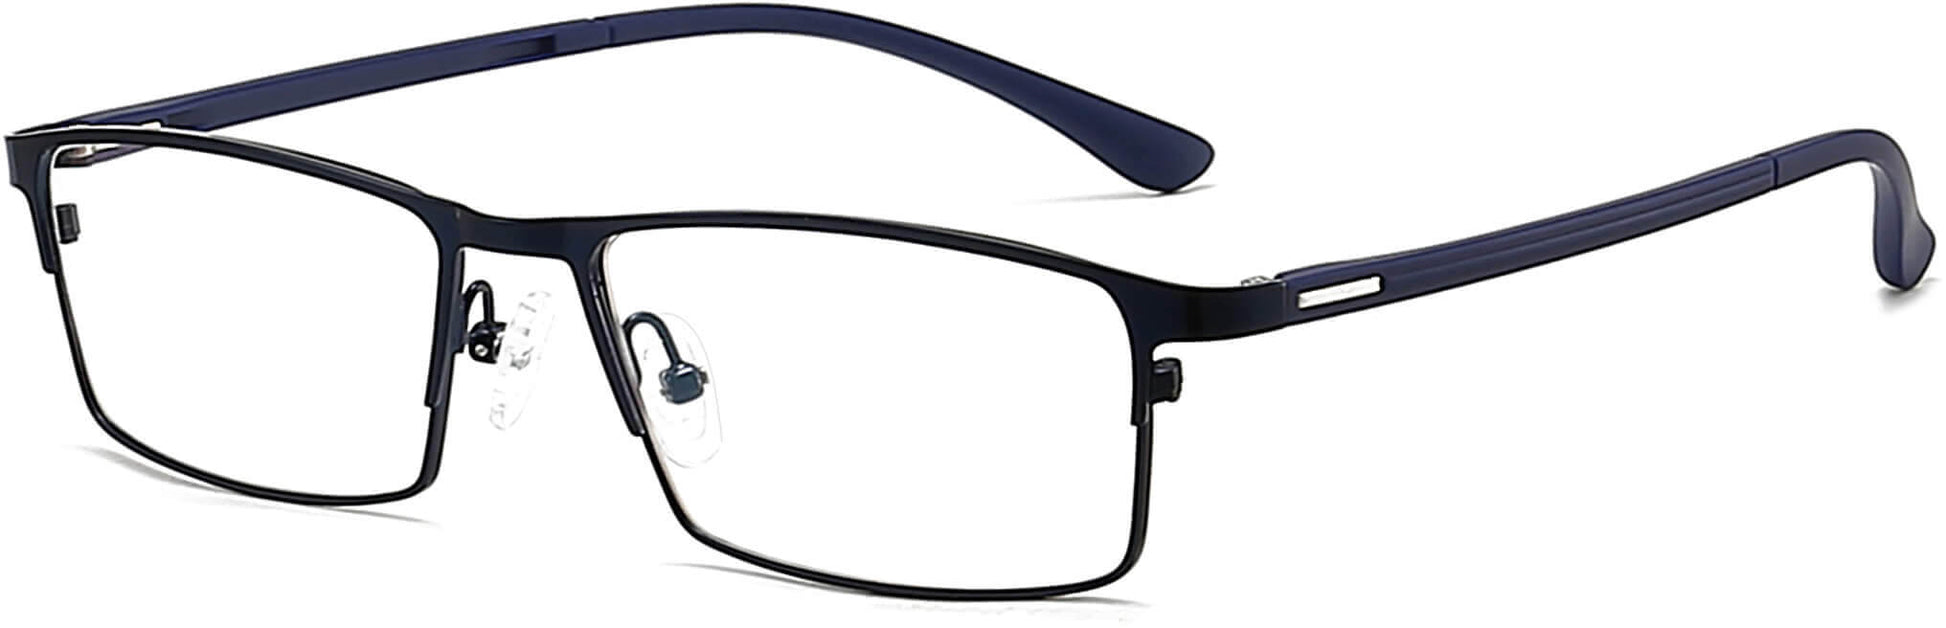 Trent Rectangle Blue Eyeglasses from ANRRI, angle view